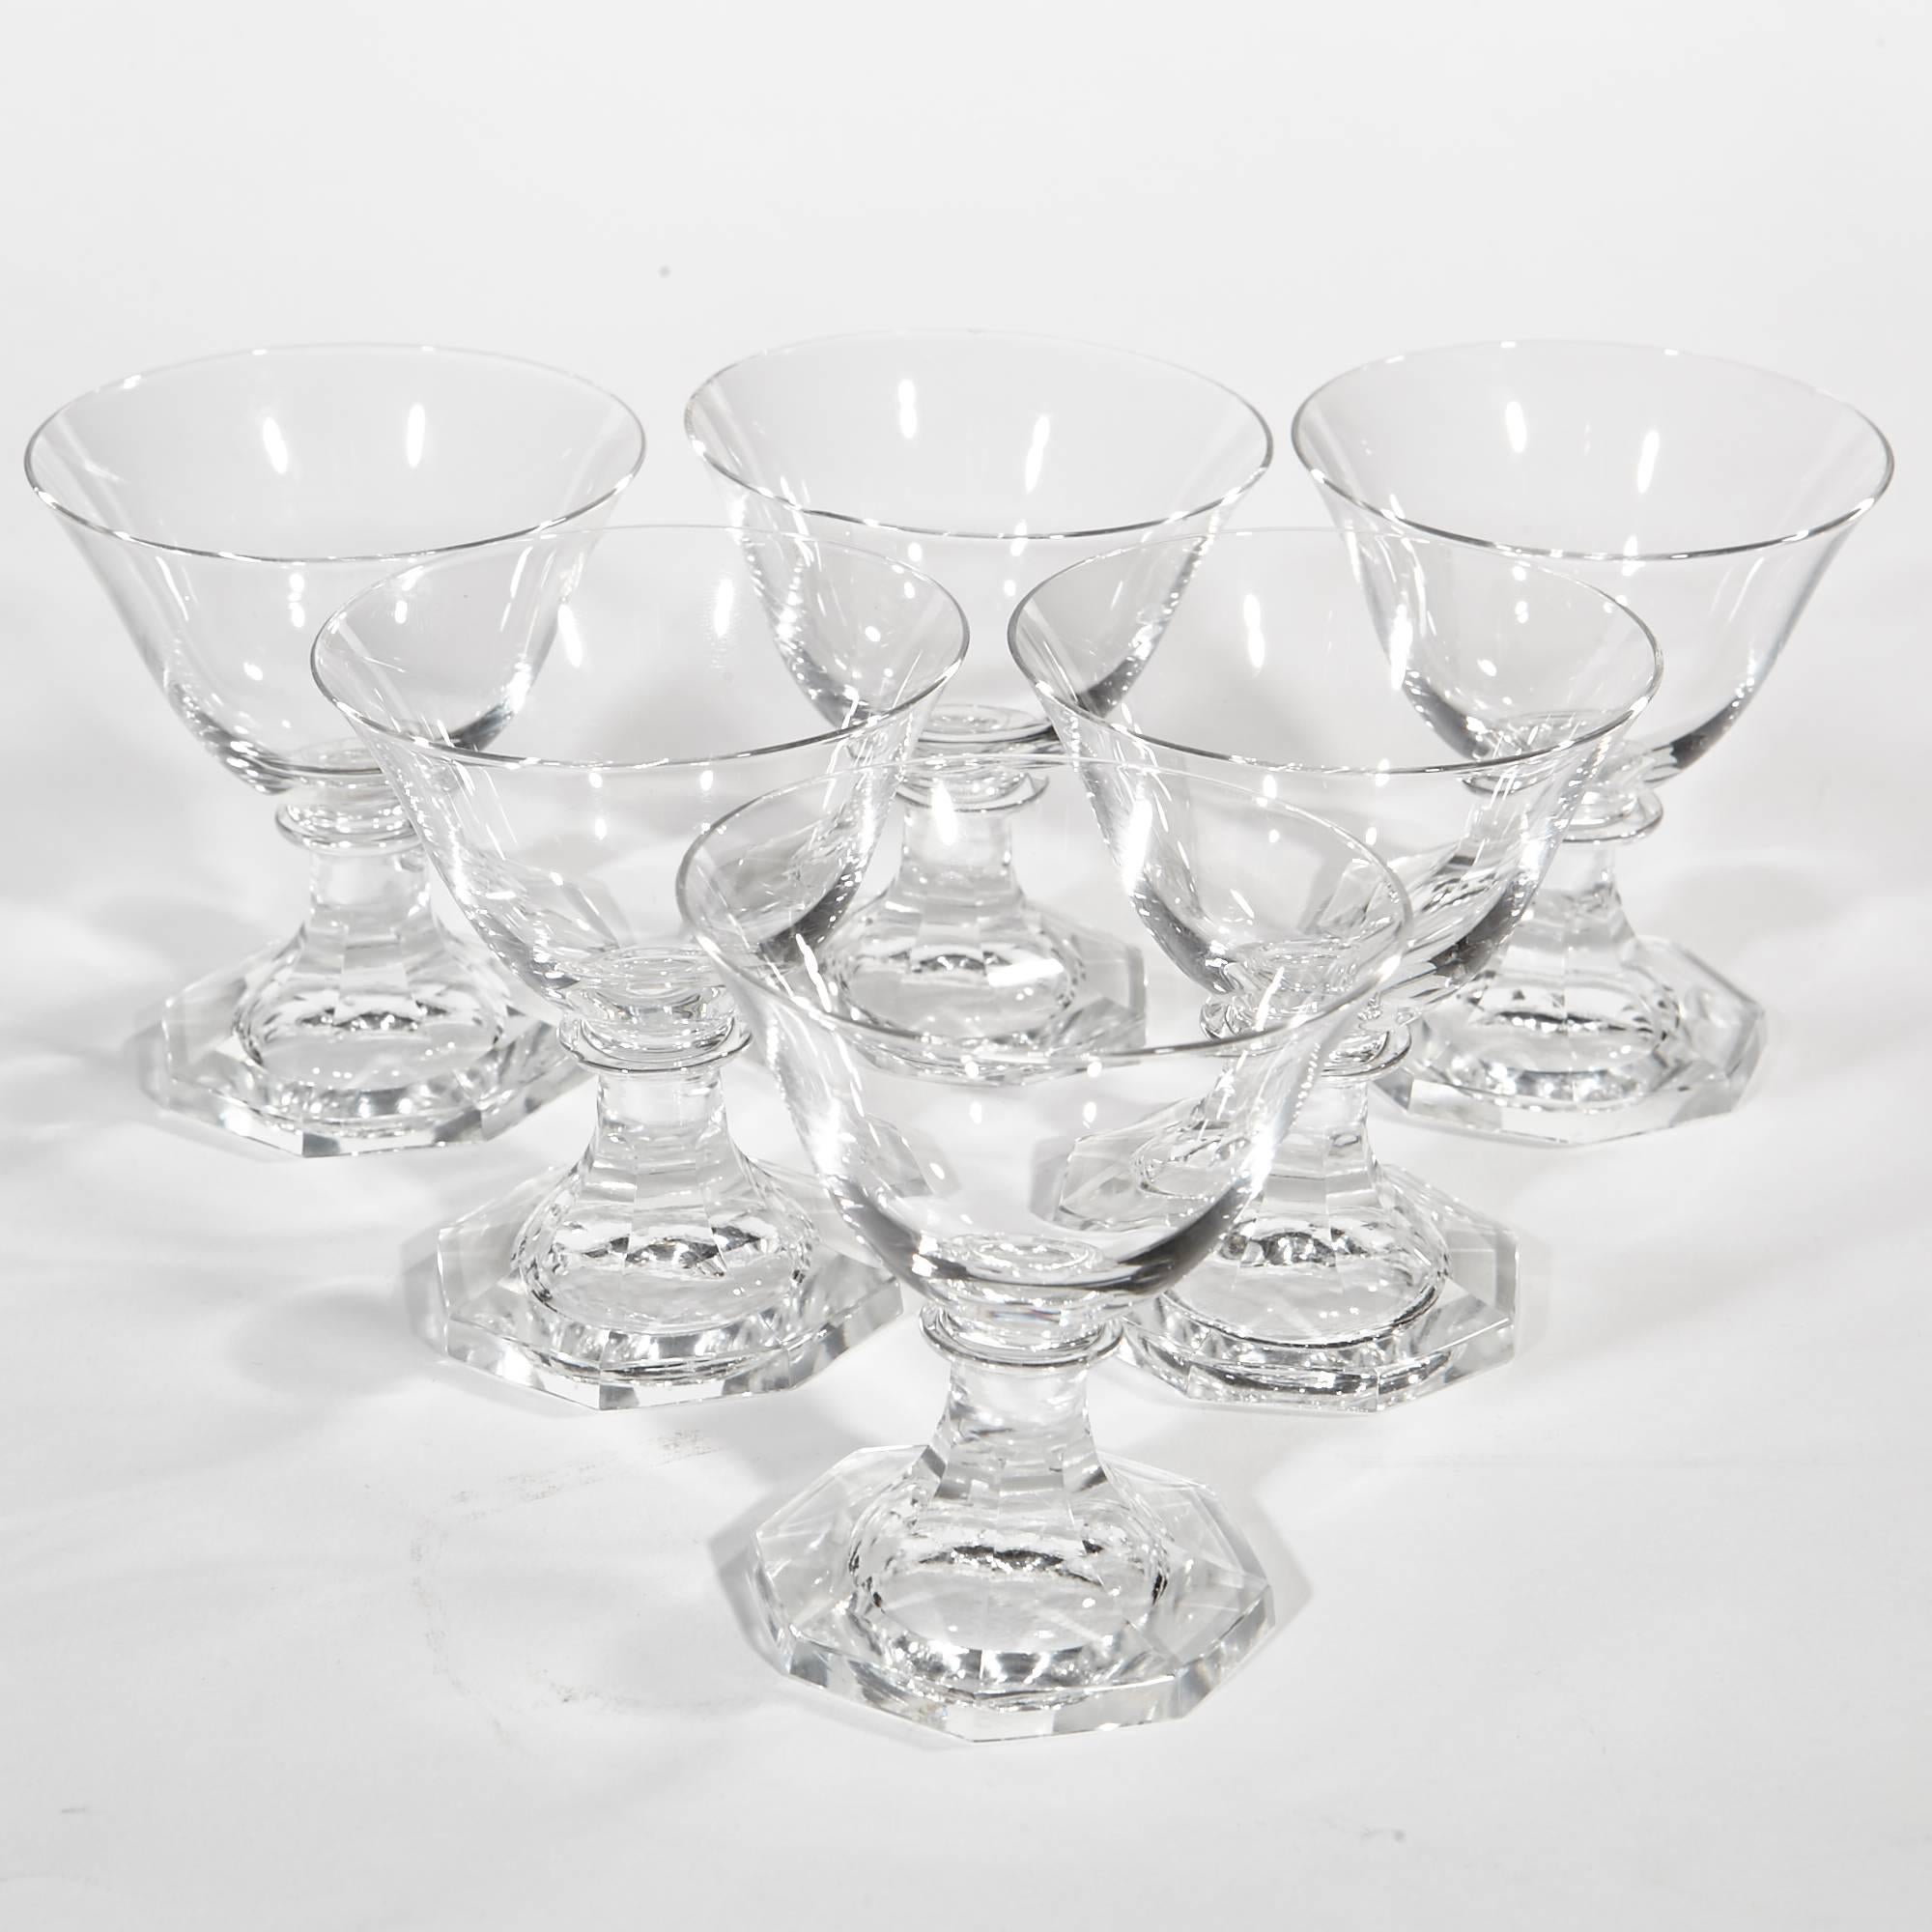 Swedish Orrefors Crystal Stems in the Seaford Pattern, 45 Pieces For Sale